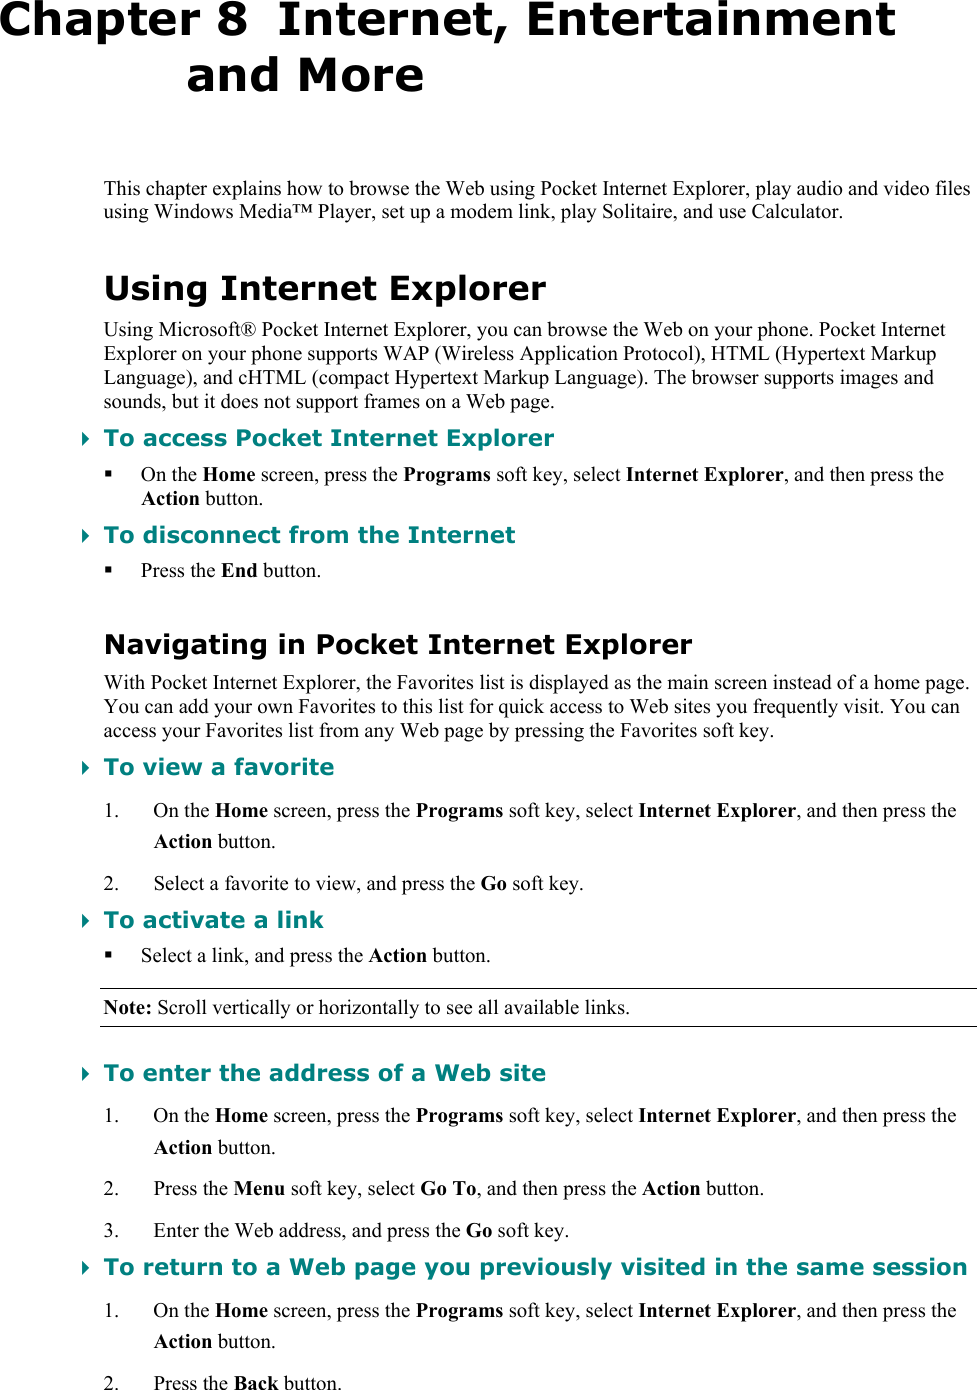   Chapter 8  Internet, Entertainment and More This chapter explains how to browse the Web using Pocket Internet Explorer, play audio and video files using Windows Media™ Player, set up a modem link, play Solitaire, and use Calculator. Using Internet Explorer Using Microsoft® Pocket Internet Explorer, you can browse the Web on your phone. Pocket Internet Explorer on your phone supports WAP (Wireless Application Protocol), HTML (Hypertext Markup Language), and cHTML (compact Hypertext Markup Language). The browser supports images and sounds, but it does not support frames on a Web page.  To access Pocket Internet Explorer  On the Home screen, press the Programs soft key, select Internet Explorer, and then press the Action button.  To disconnect from the Internet  Press the End button. Navigating in Pocket Internet Explorer With Pocket Internet Explorer, the Favorites list is displayed as the main screen instead of a home page. You can add your own Favorites to this list for quick access to Web sites you frequently visit. You can access your Favorites list from any Web page by pressing the Favorites soft key.  To view a favorite 1. On the Home screen, press the Programs soft key, select Internet Explorer, and then press the Action button. 2. Select a favorite to view, and press the Go soft key.  To activate a link  Select a link, and press the Action button. Note: Scroll vertically or horizontally to see all available links.  To enter the address of a Web site 1. On the Home screen, press the Programs soft key, select Internet Explorer, and then press the Action button. 2. Press the Menu soft key, select Go To, and then press the Action button. 3. Enter the Web address, and press the Go soft key.  To return to a Web page you previously visited in the same session 1. On the Home screen, press the Programs soft key, select Internet Explorer, and then press the Action button. 2. Press the Back button. 